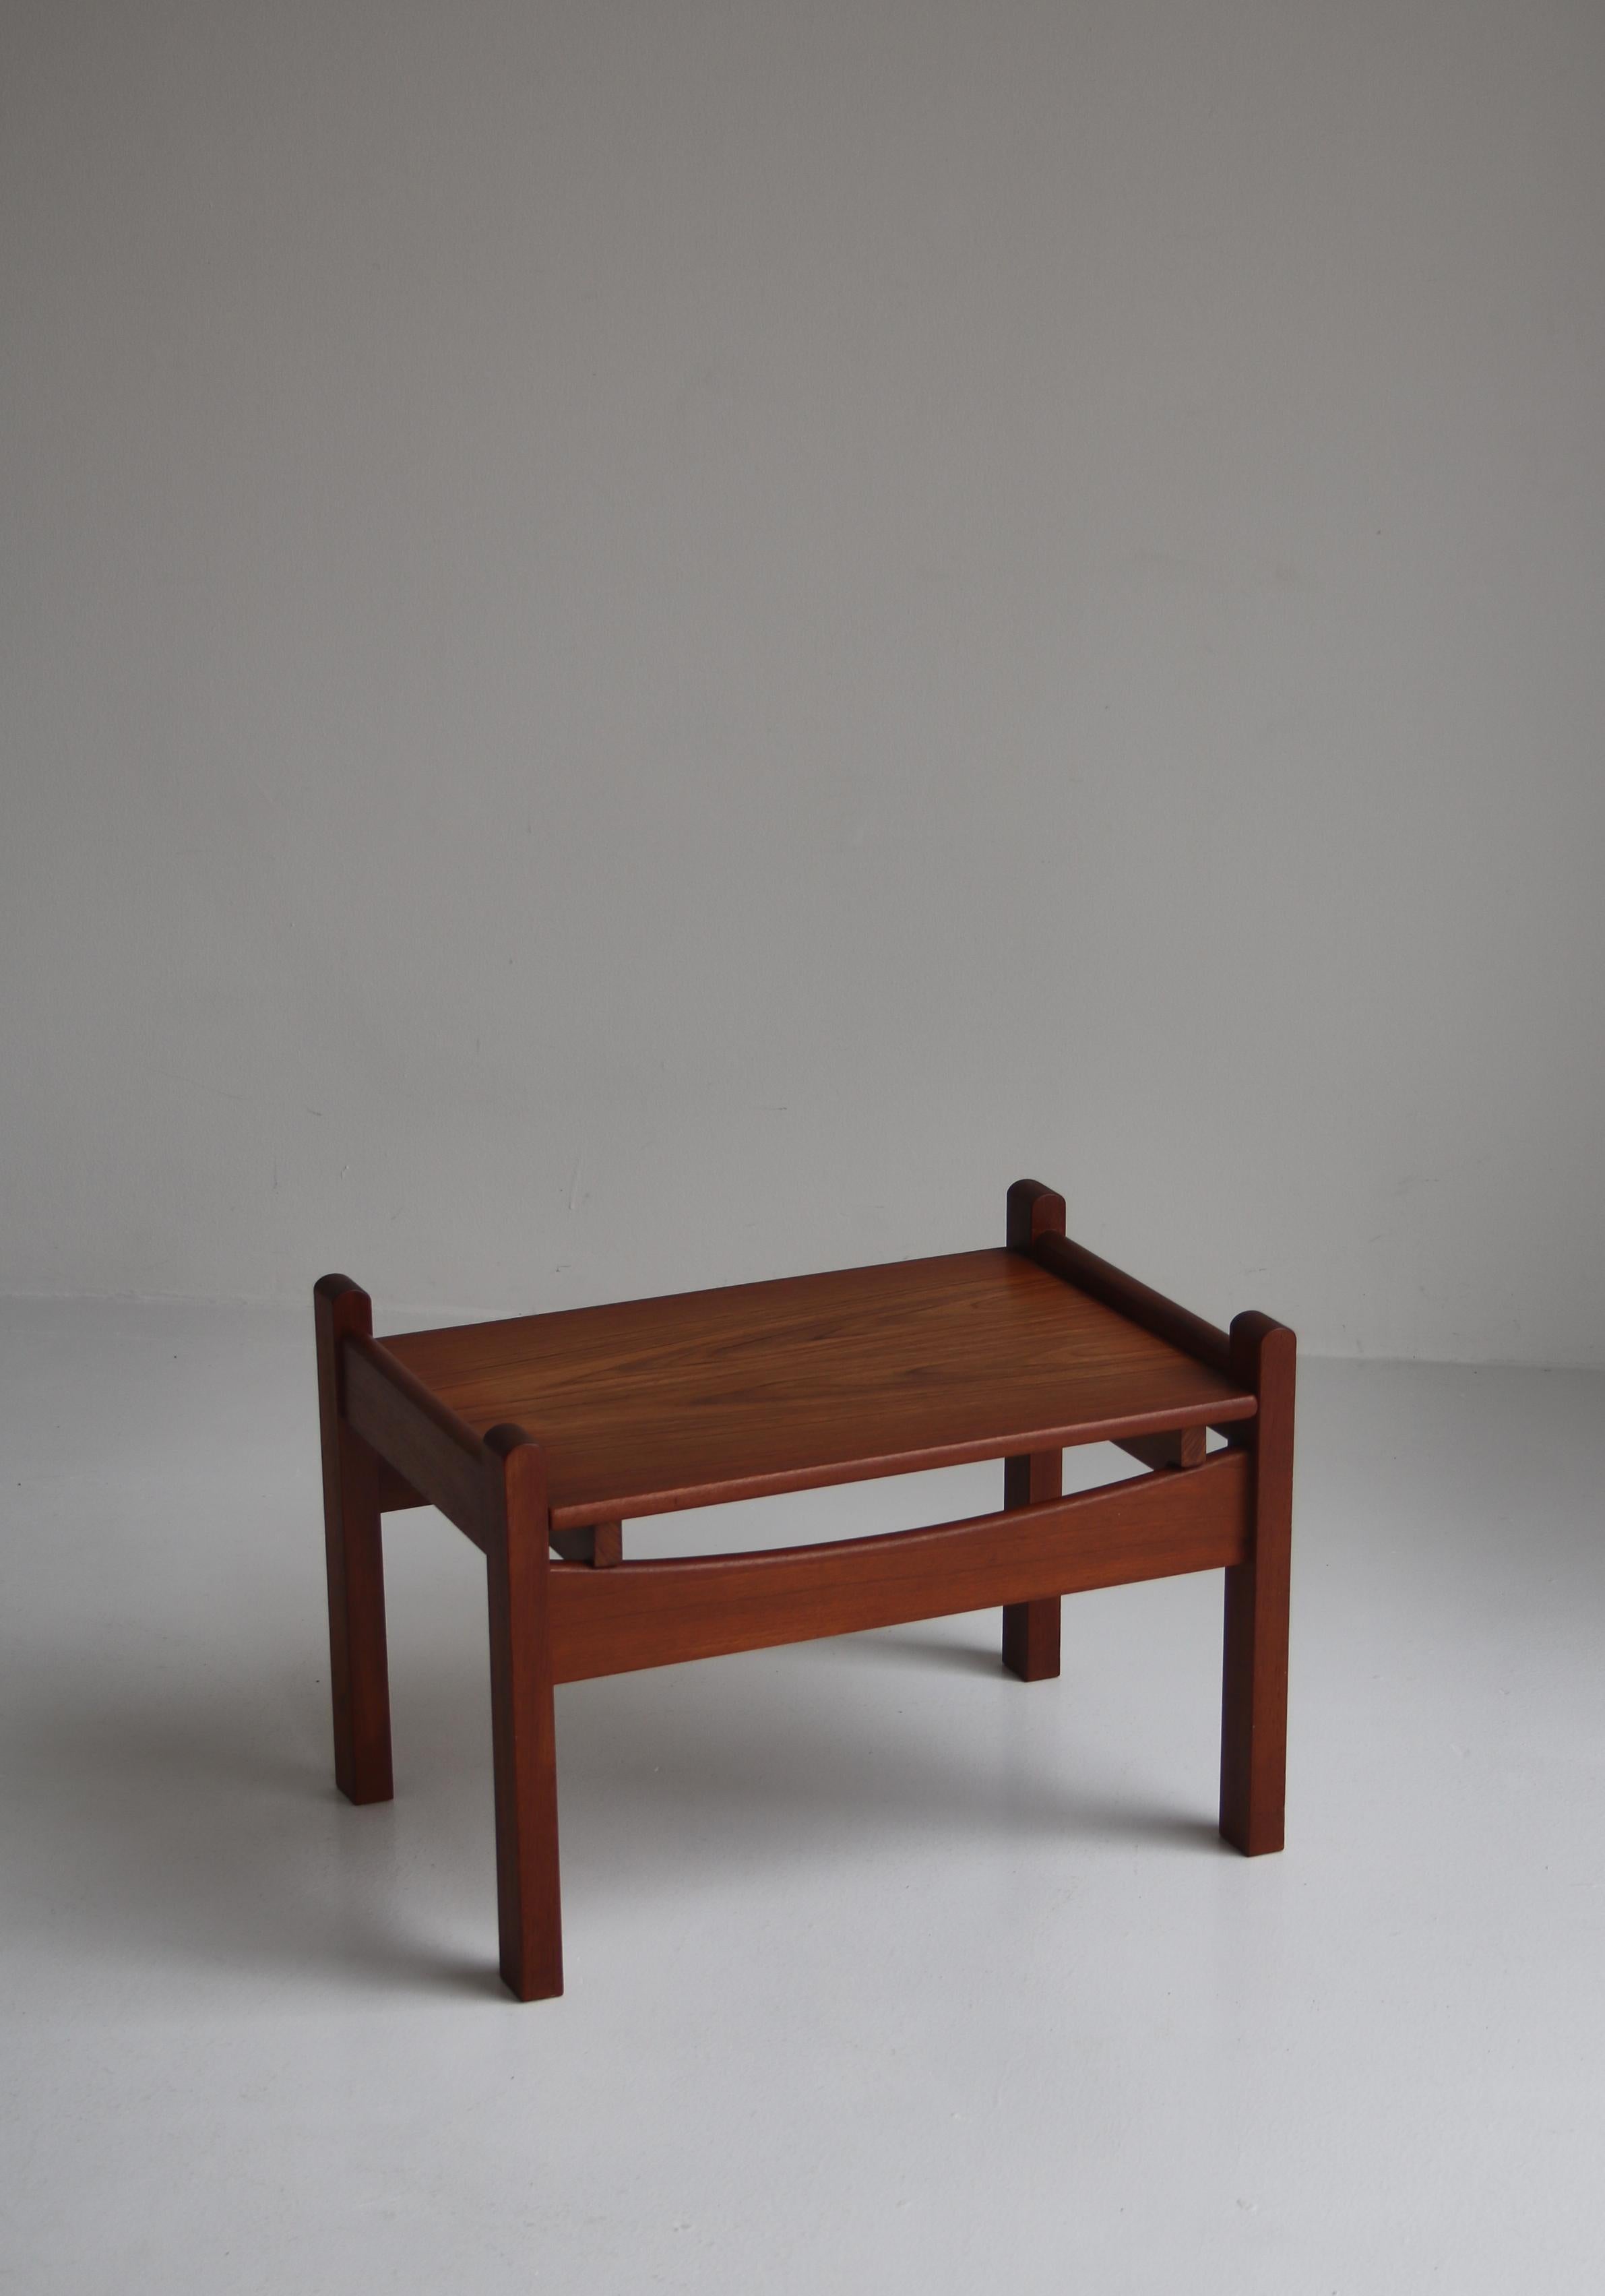 Danish Modern Stool / Sidetable in Teakwood and Black Leather, 1960s For Sale 5